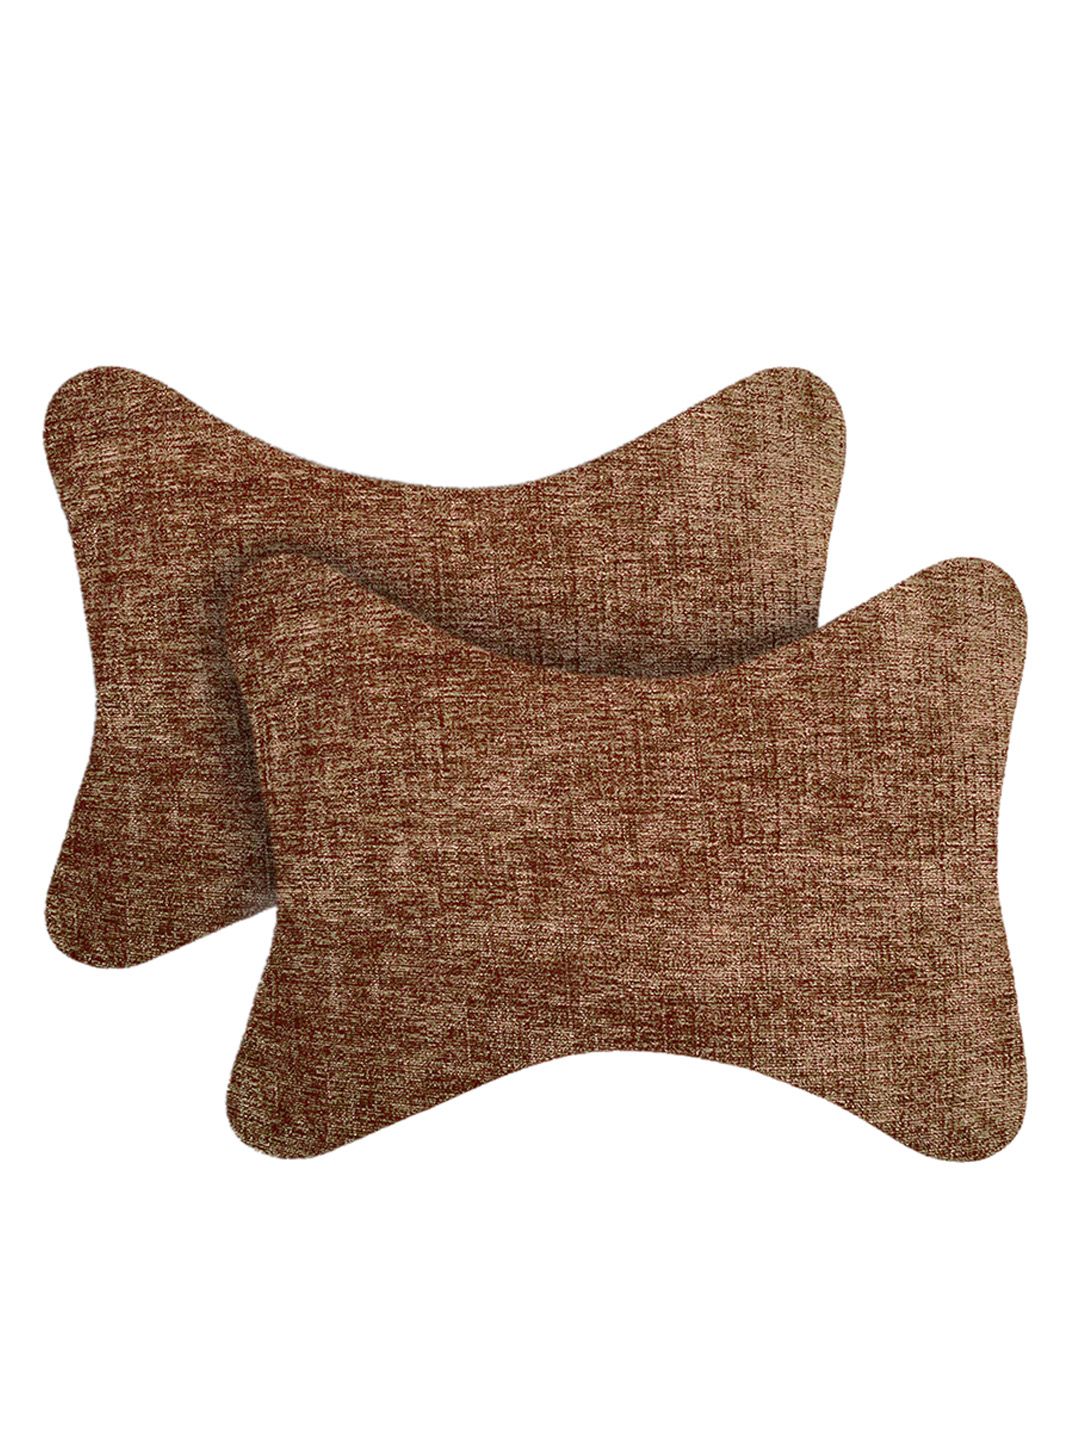 Lushomes Set of 2 Brown Car Seat Neck Rest Pillow Price in India